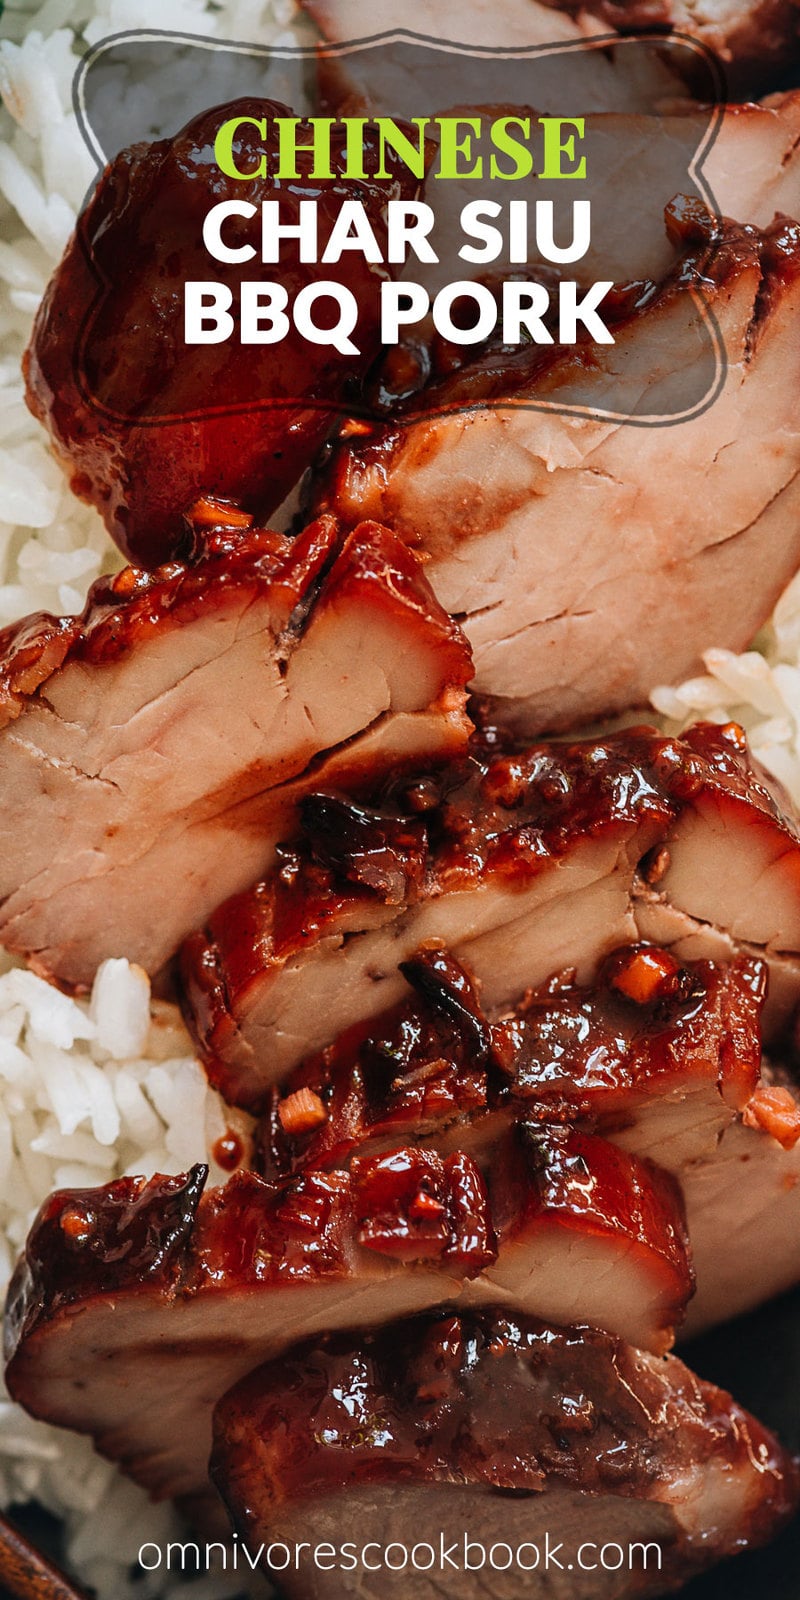 Char Siu (Chinese BBQ Pork, 叉烧肉) - The only char siu recipe you need to make juicy flavorful pork with a sweet glossy glaze, just like you’d get at a Cantonese restaurant. {Gluten-Free adaptable}